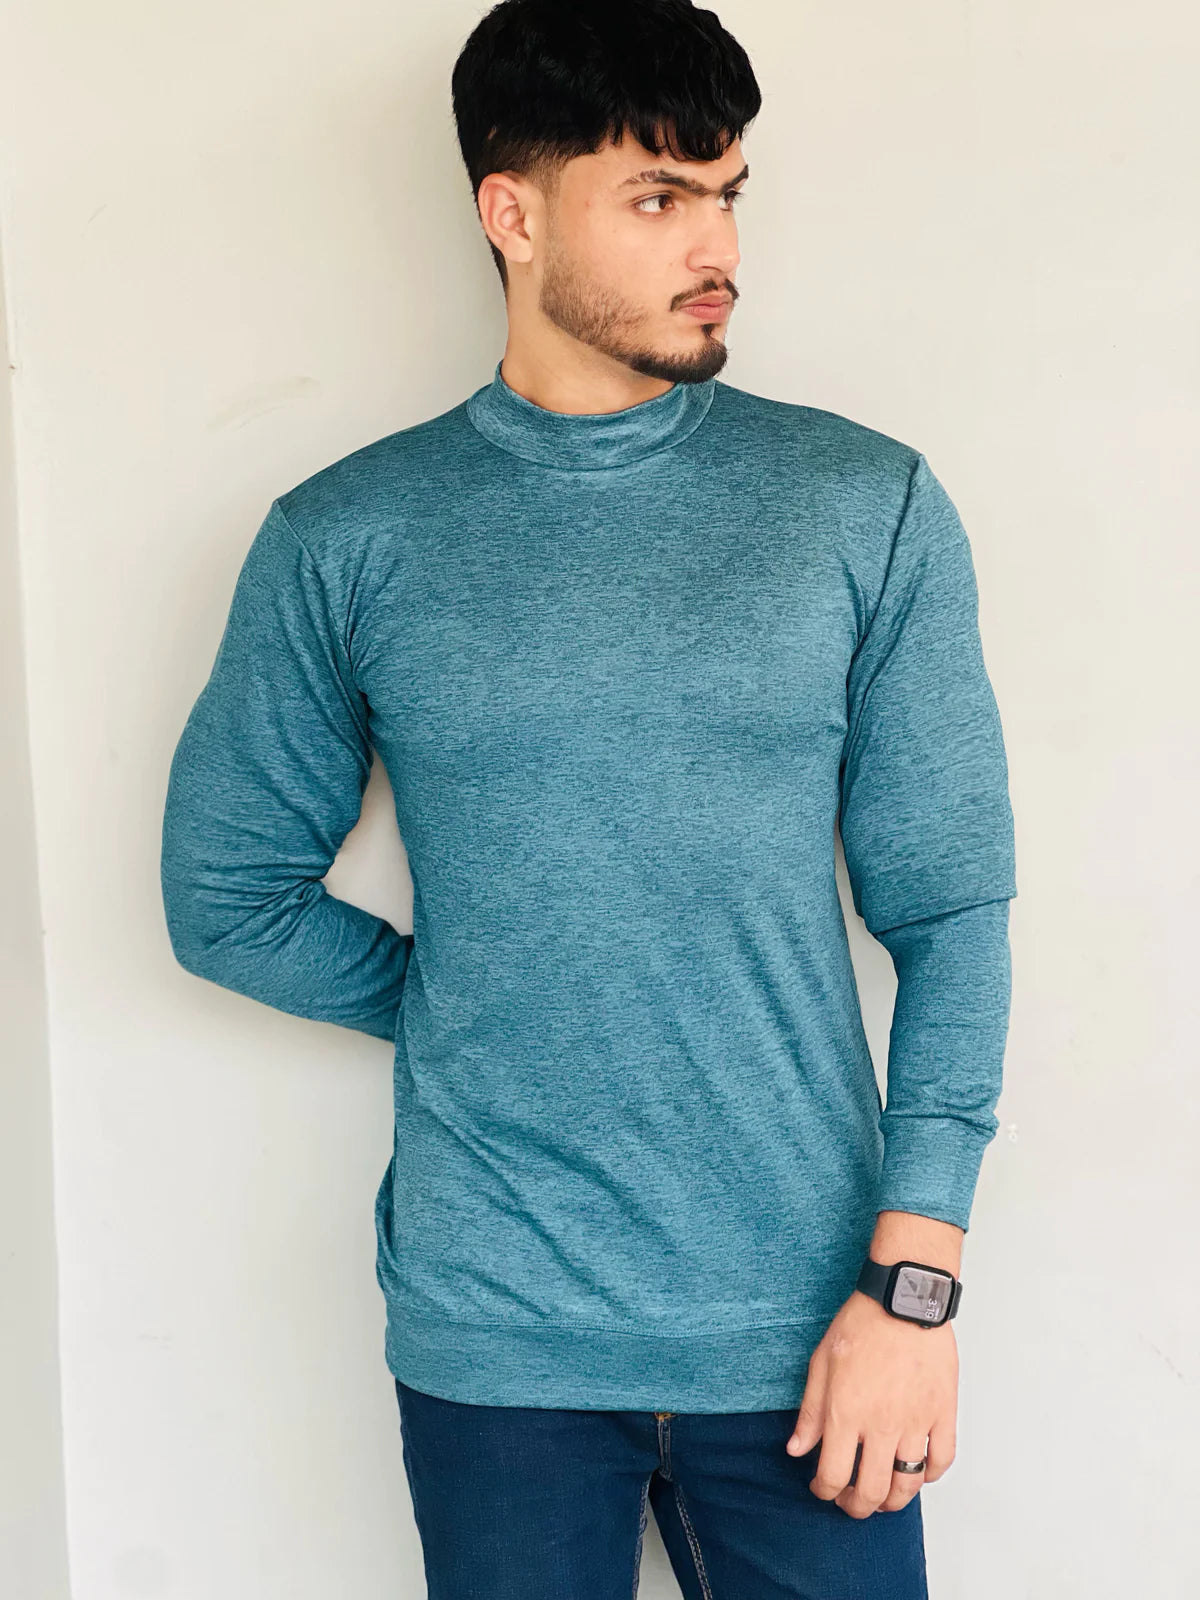 CREWNECK BLUE SWEATERS: YOUR STYLE STAPLE FOR COMFORT AND VERSATILITY-